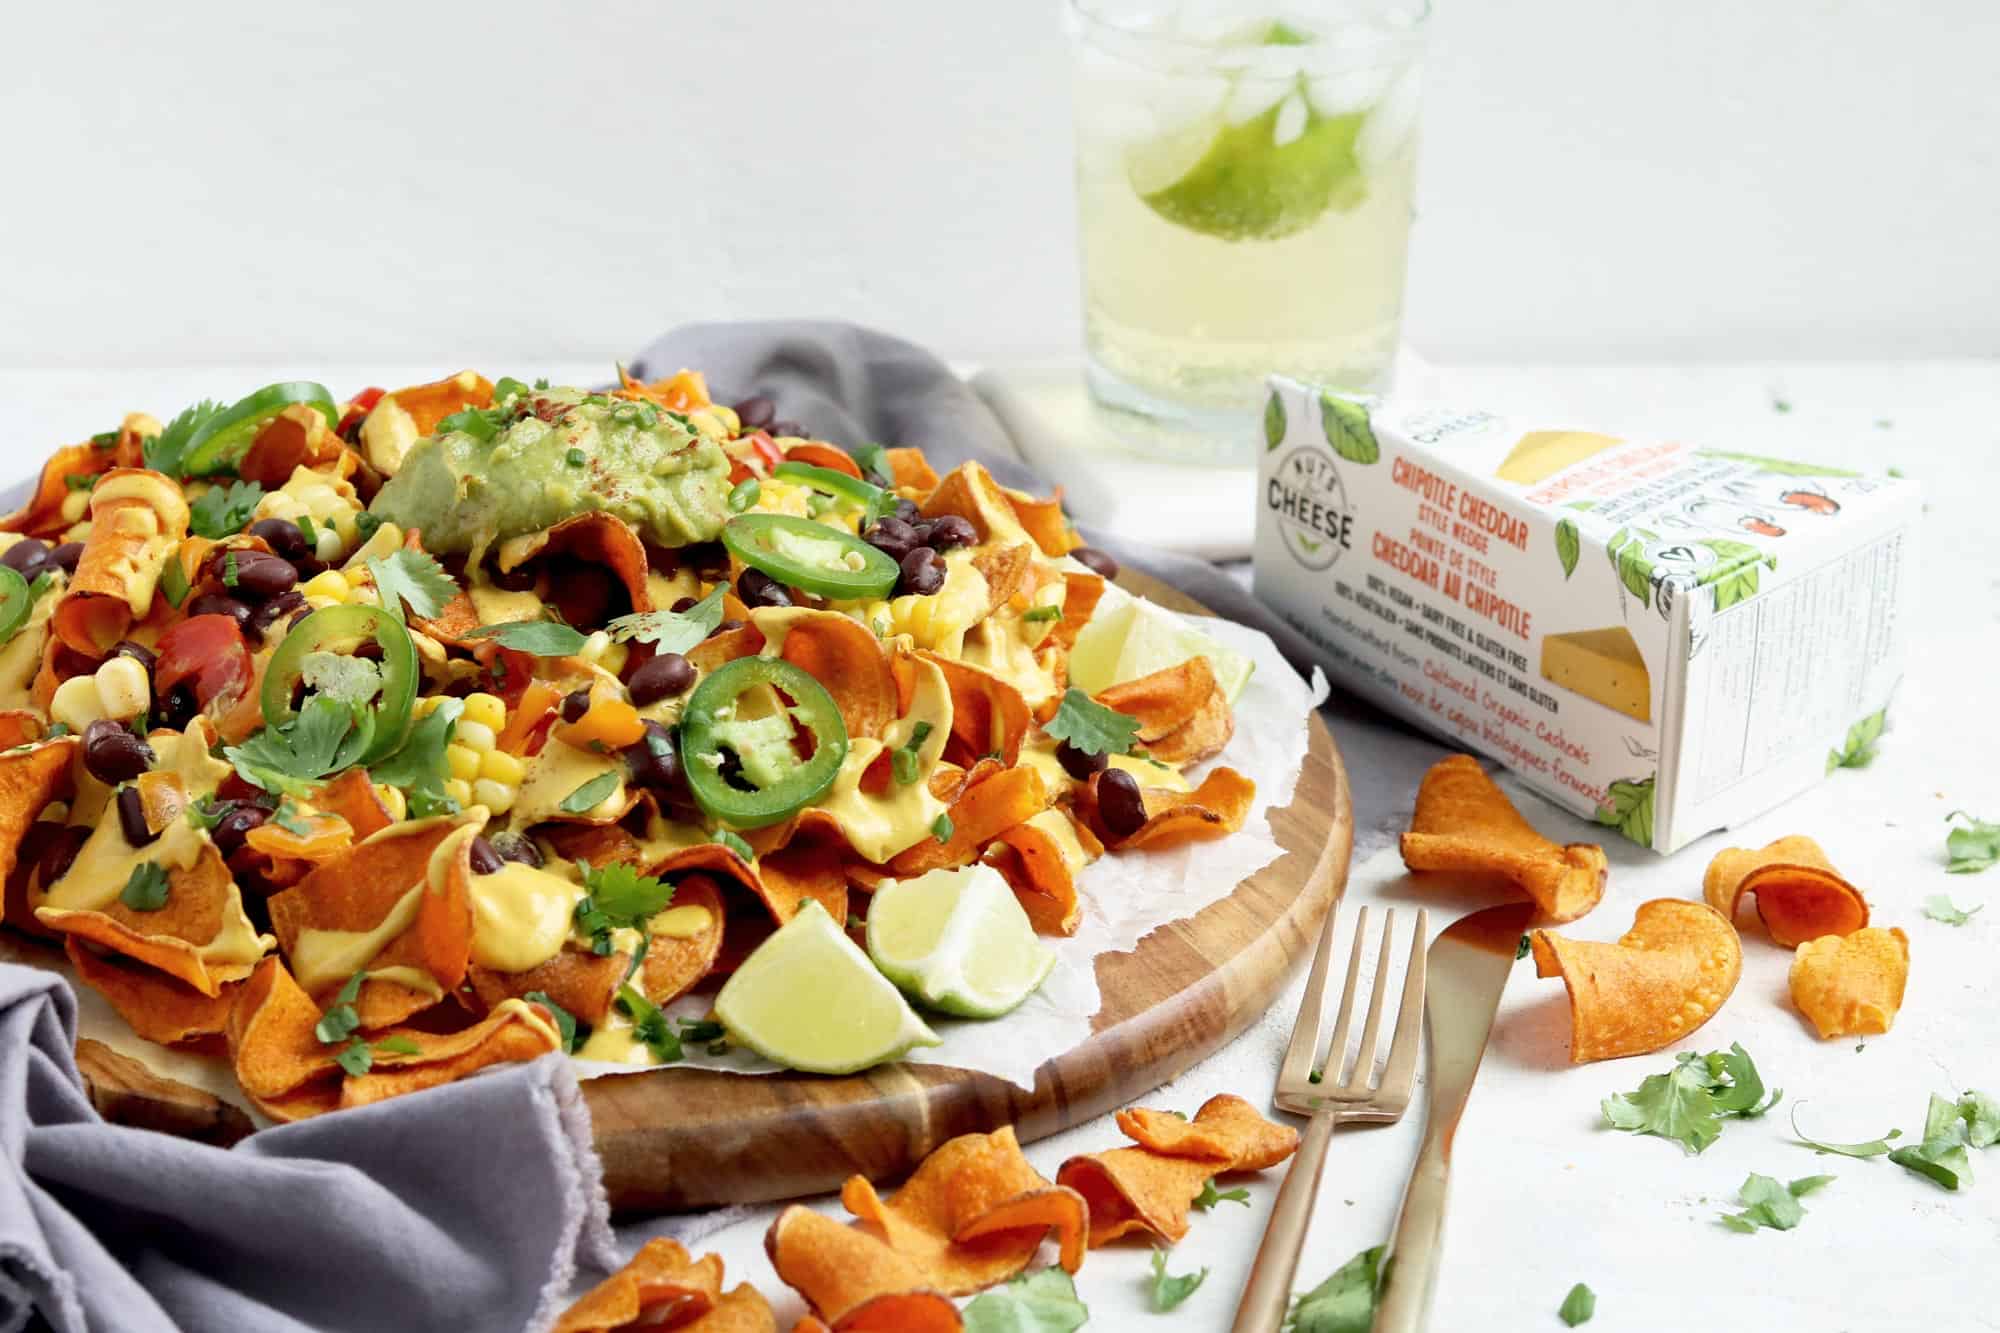 Plate of sweet potato nachos loaded with dairy-free chipotle cheese sauce, corn, black beans, jalapenos and guacamole. Served beside a box of dairy-free chipotle cheddar cheese.